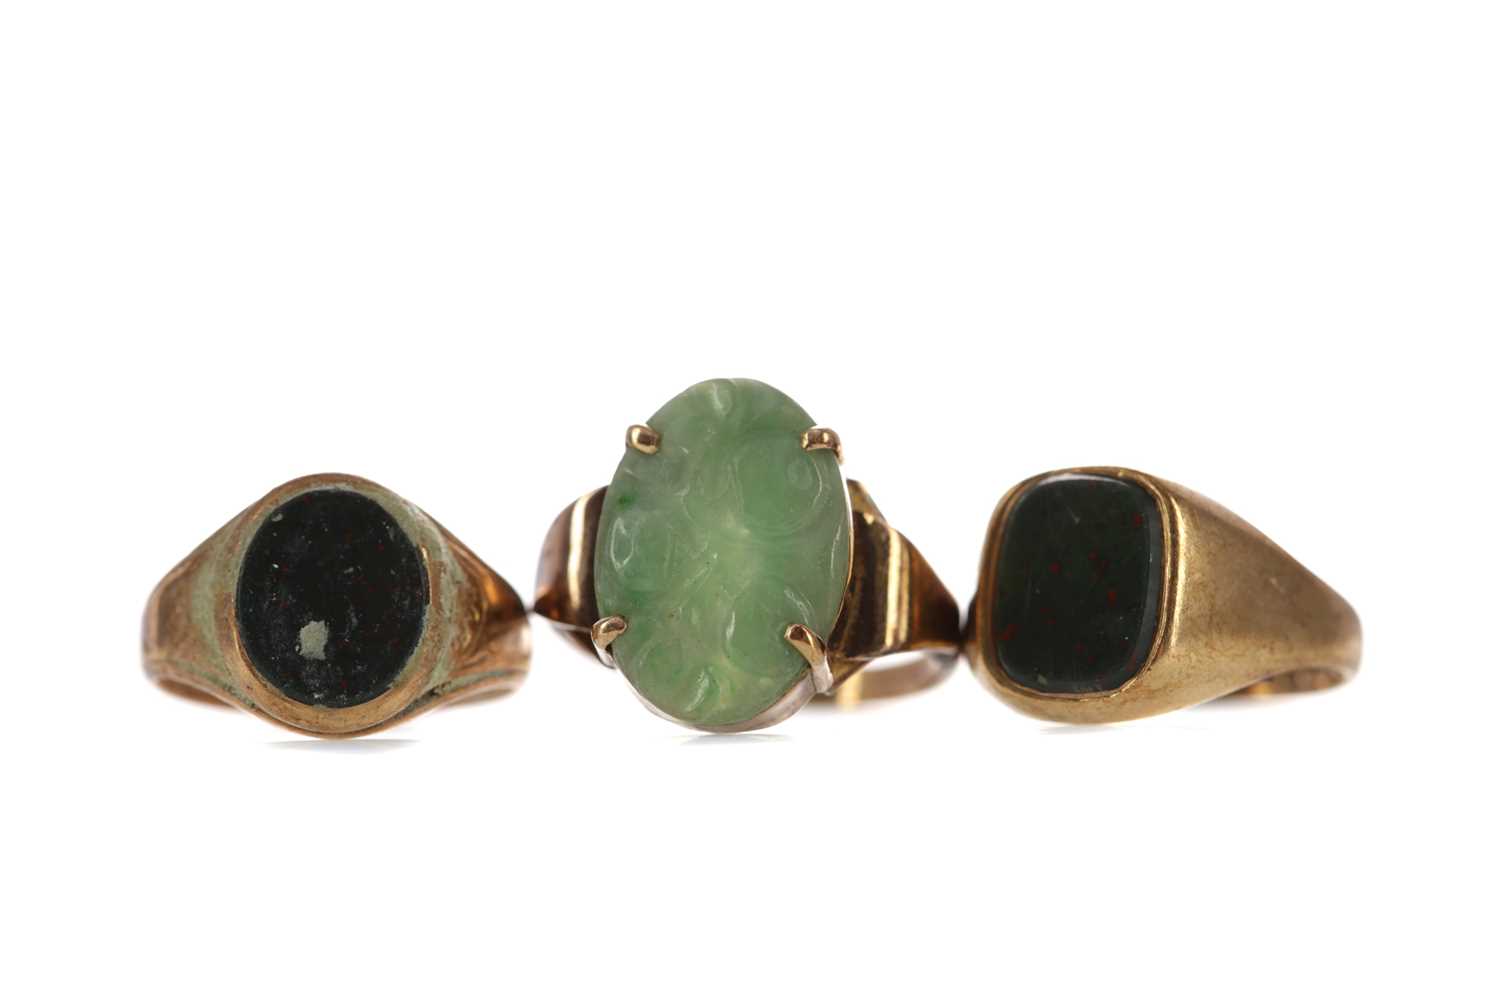 Lot 1383 - TWO BLOODSTONE AGATE RINGS AND A GREEN HARDSTONE RING